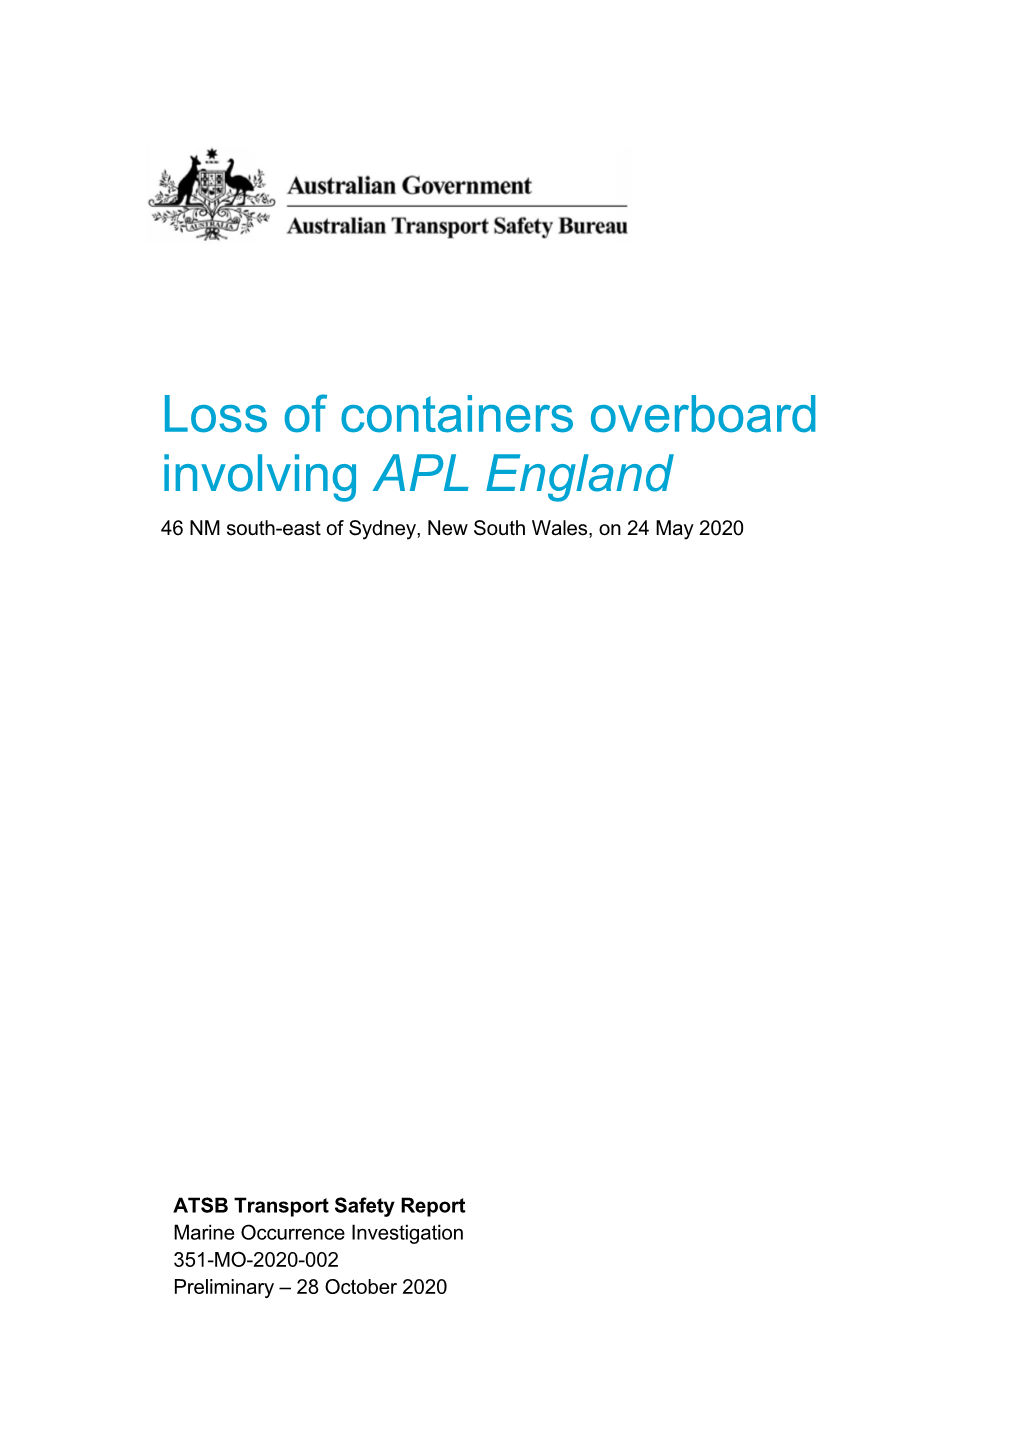 Loss of Containers Overboard Involving APL England, 46 NM